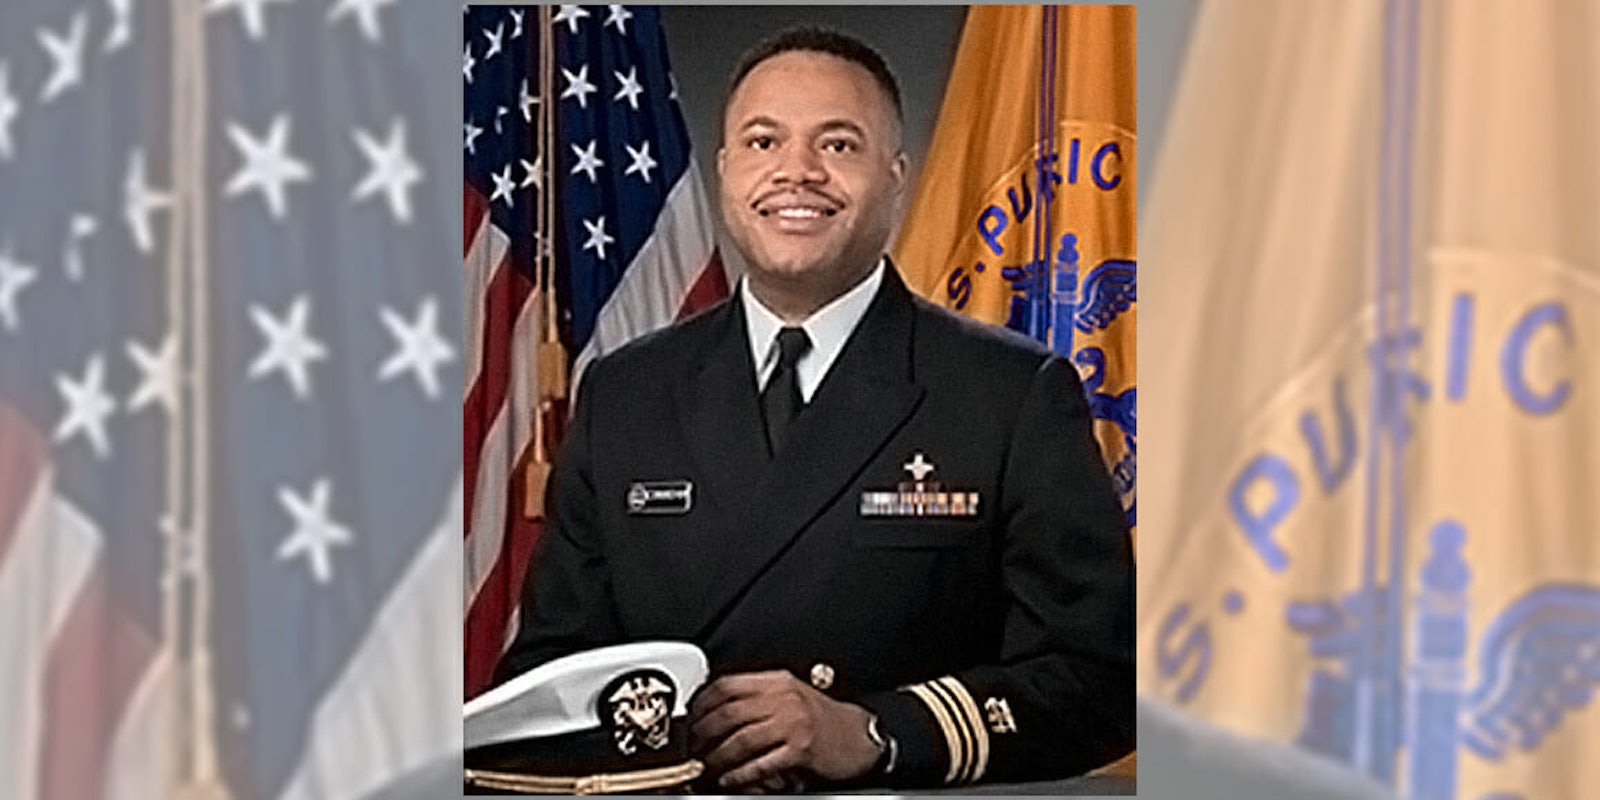 timothy cunningham of the CDC